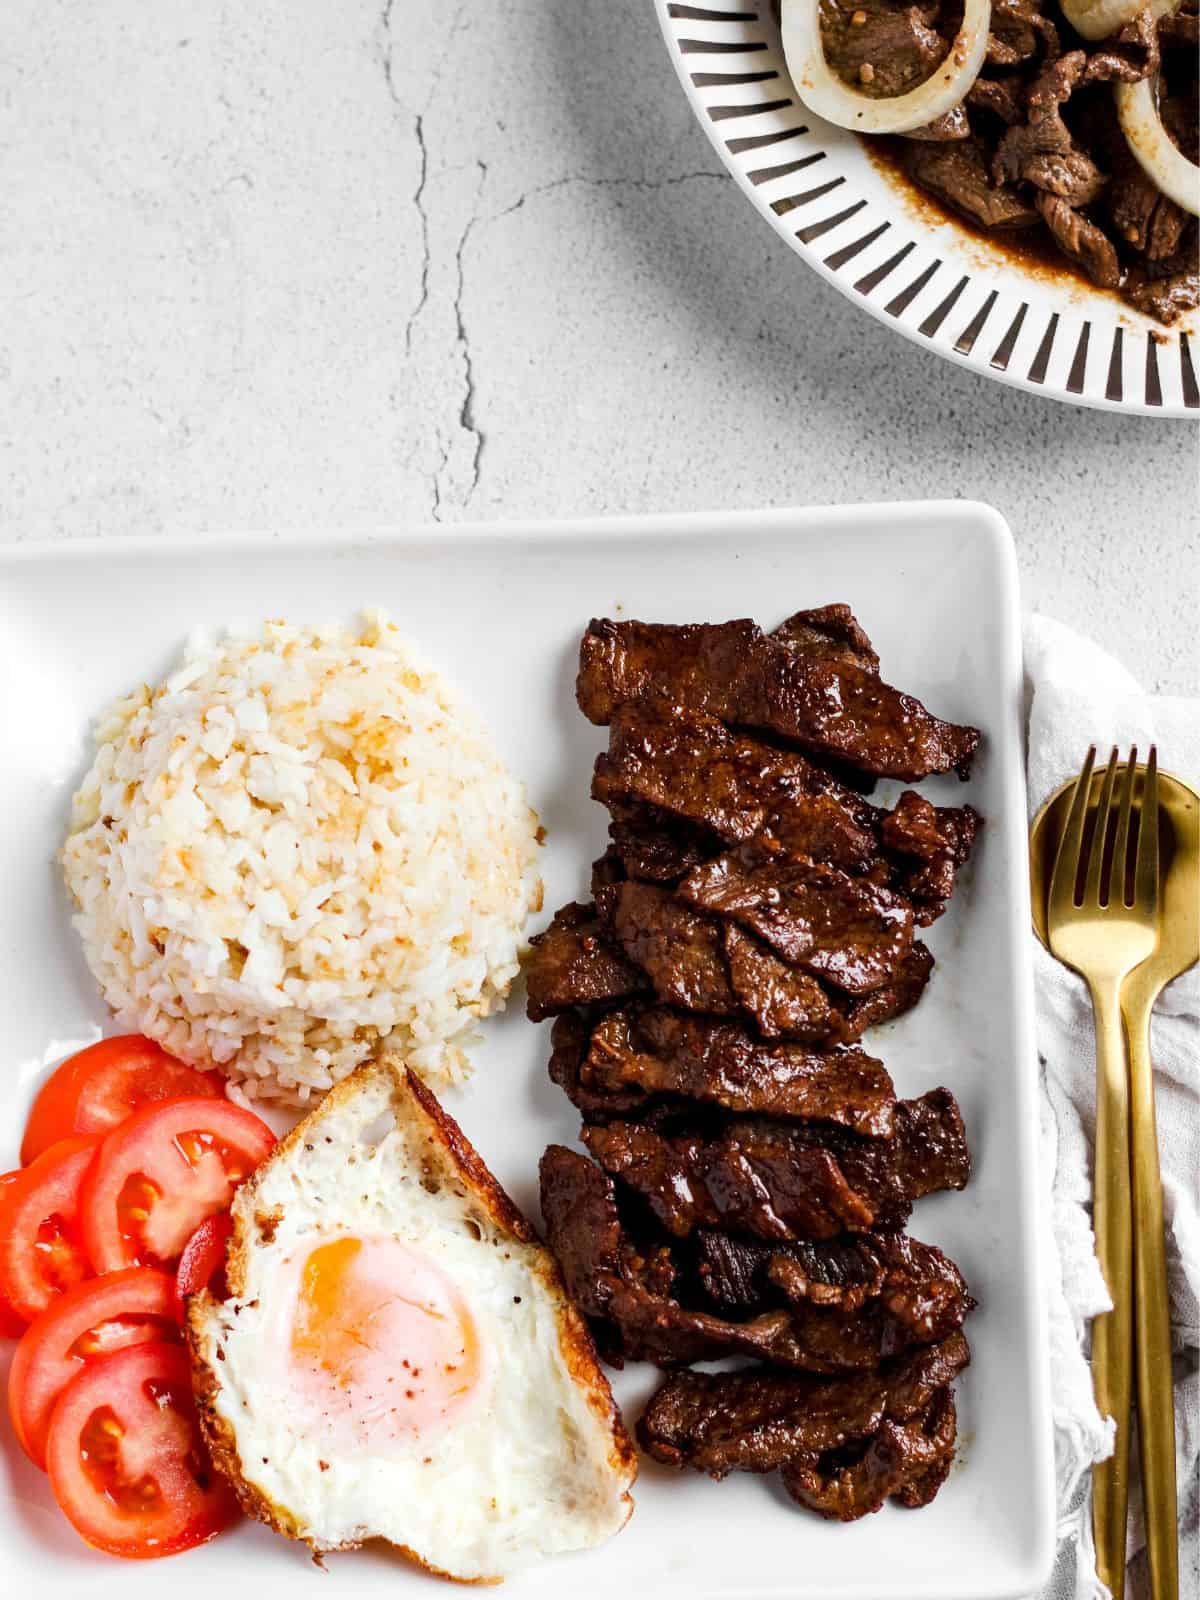 Filipino beef tapa in the table and ready to eat with fried rice and fried egg.